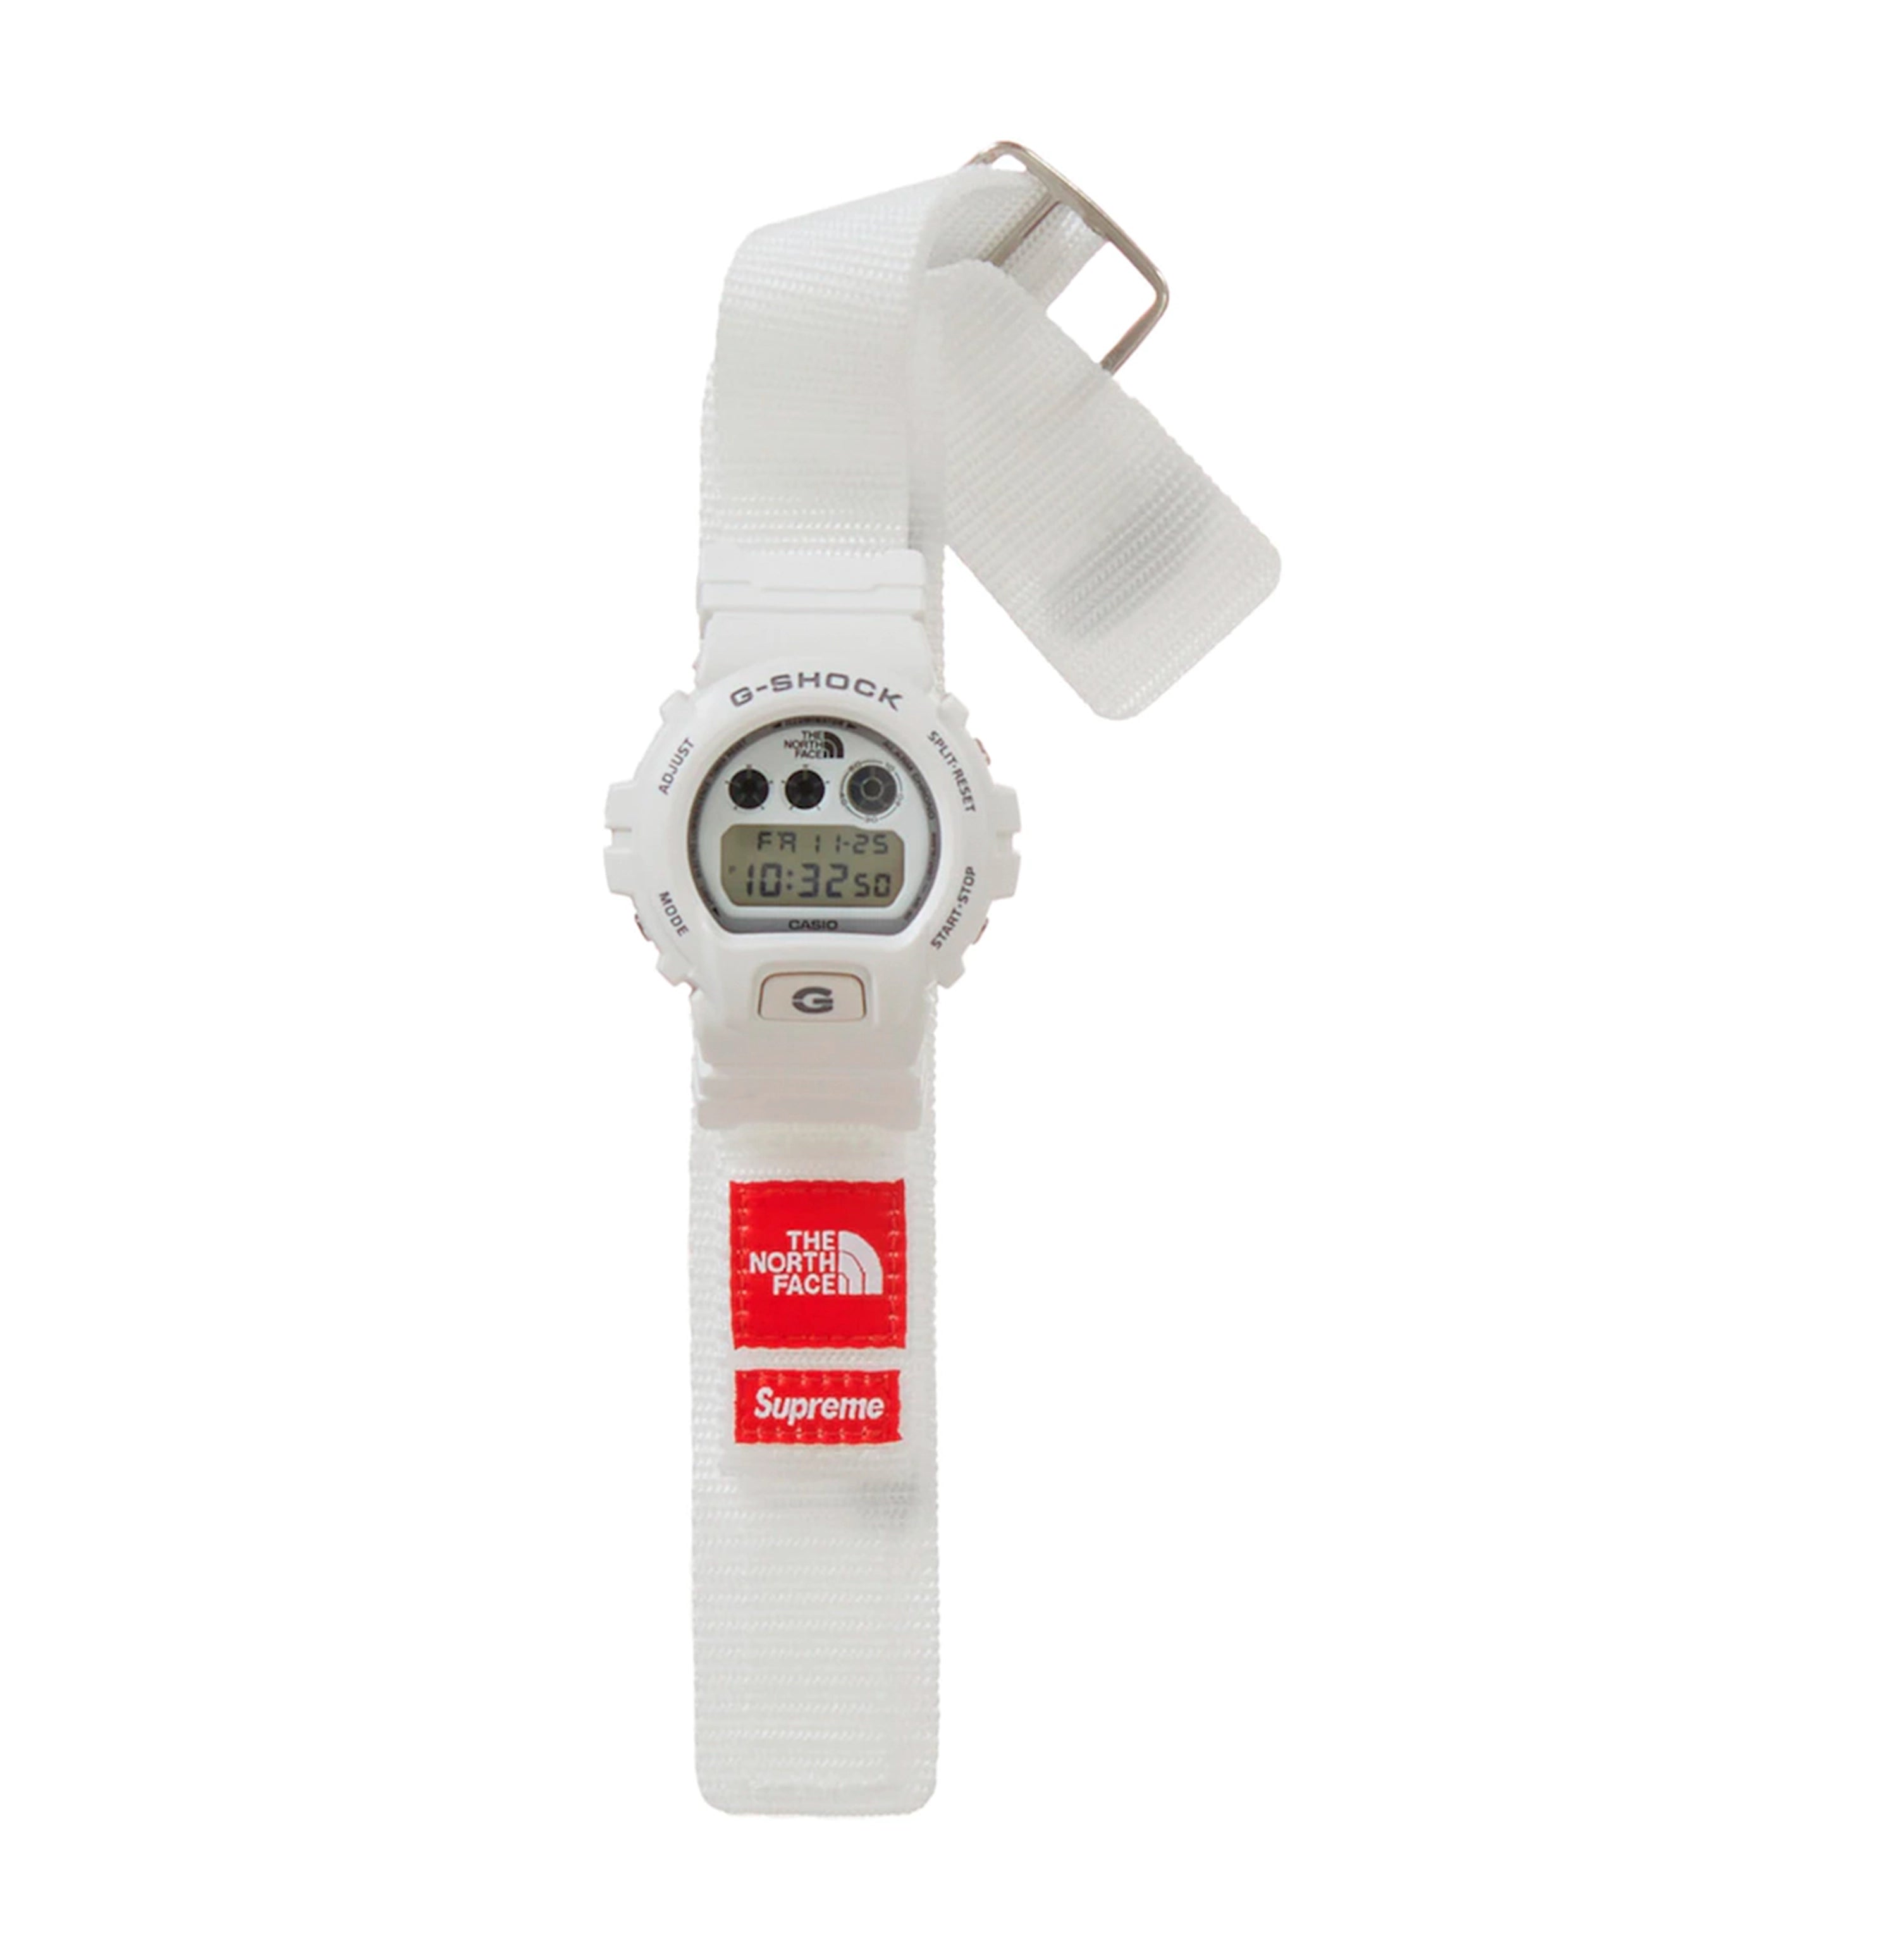 SUPREME The North Face G-SHOCK Watch White